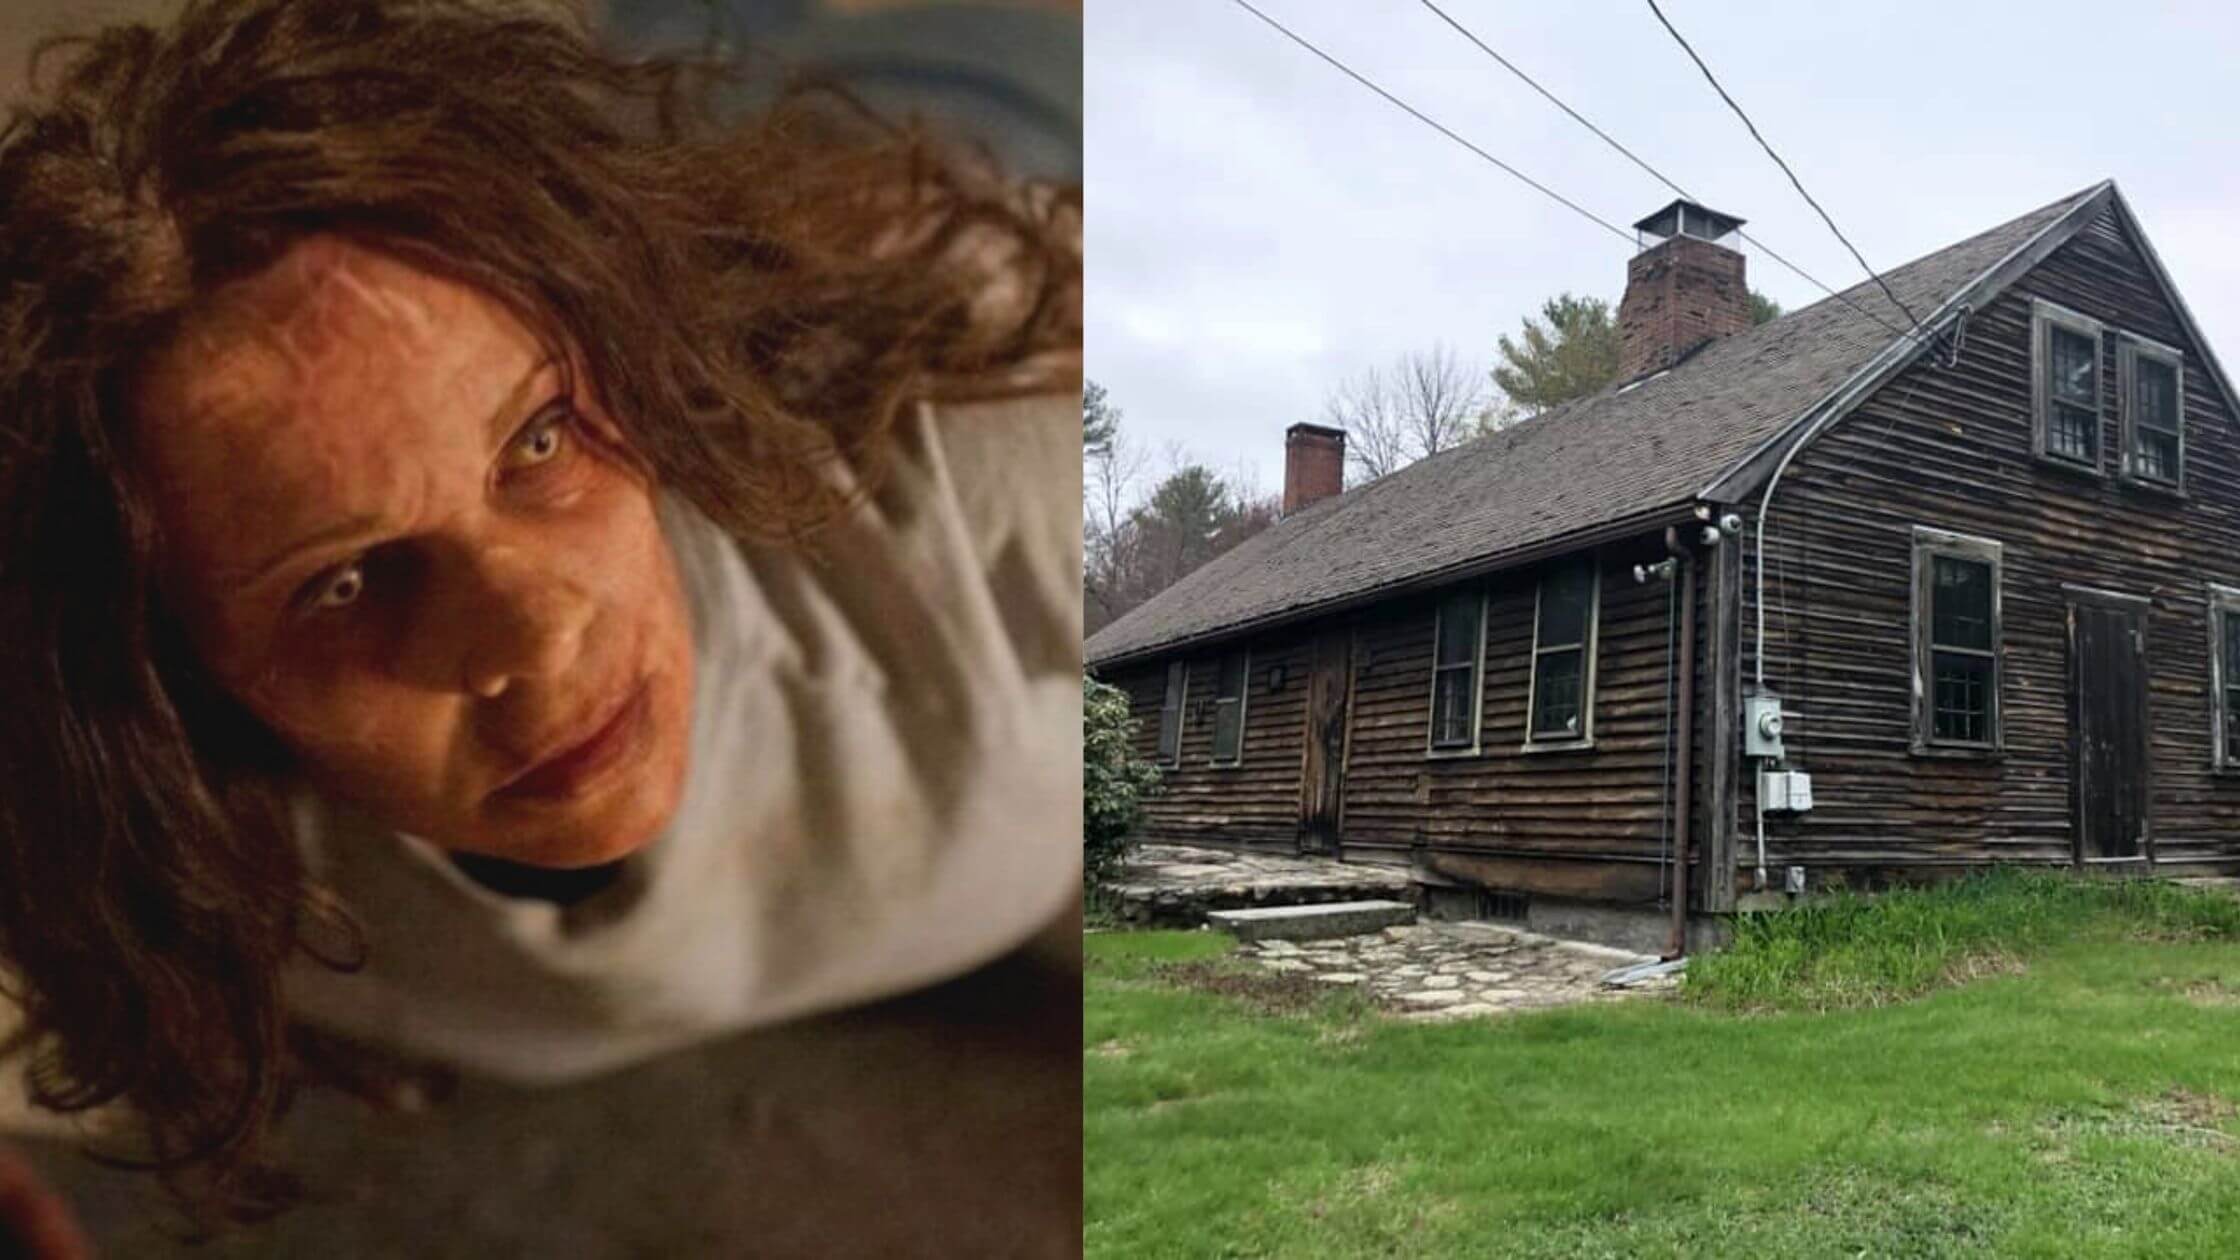 A House That Inspired The Film 'The Conjuring' Has Sold For More Than $1.5 Million